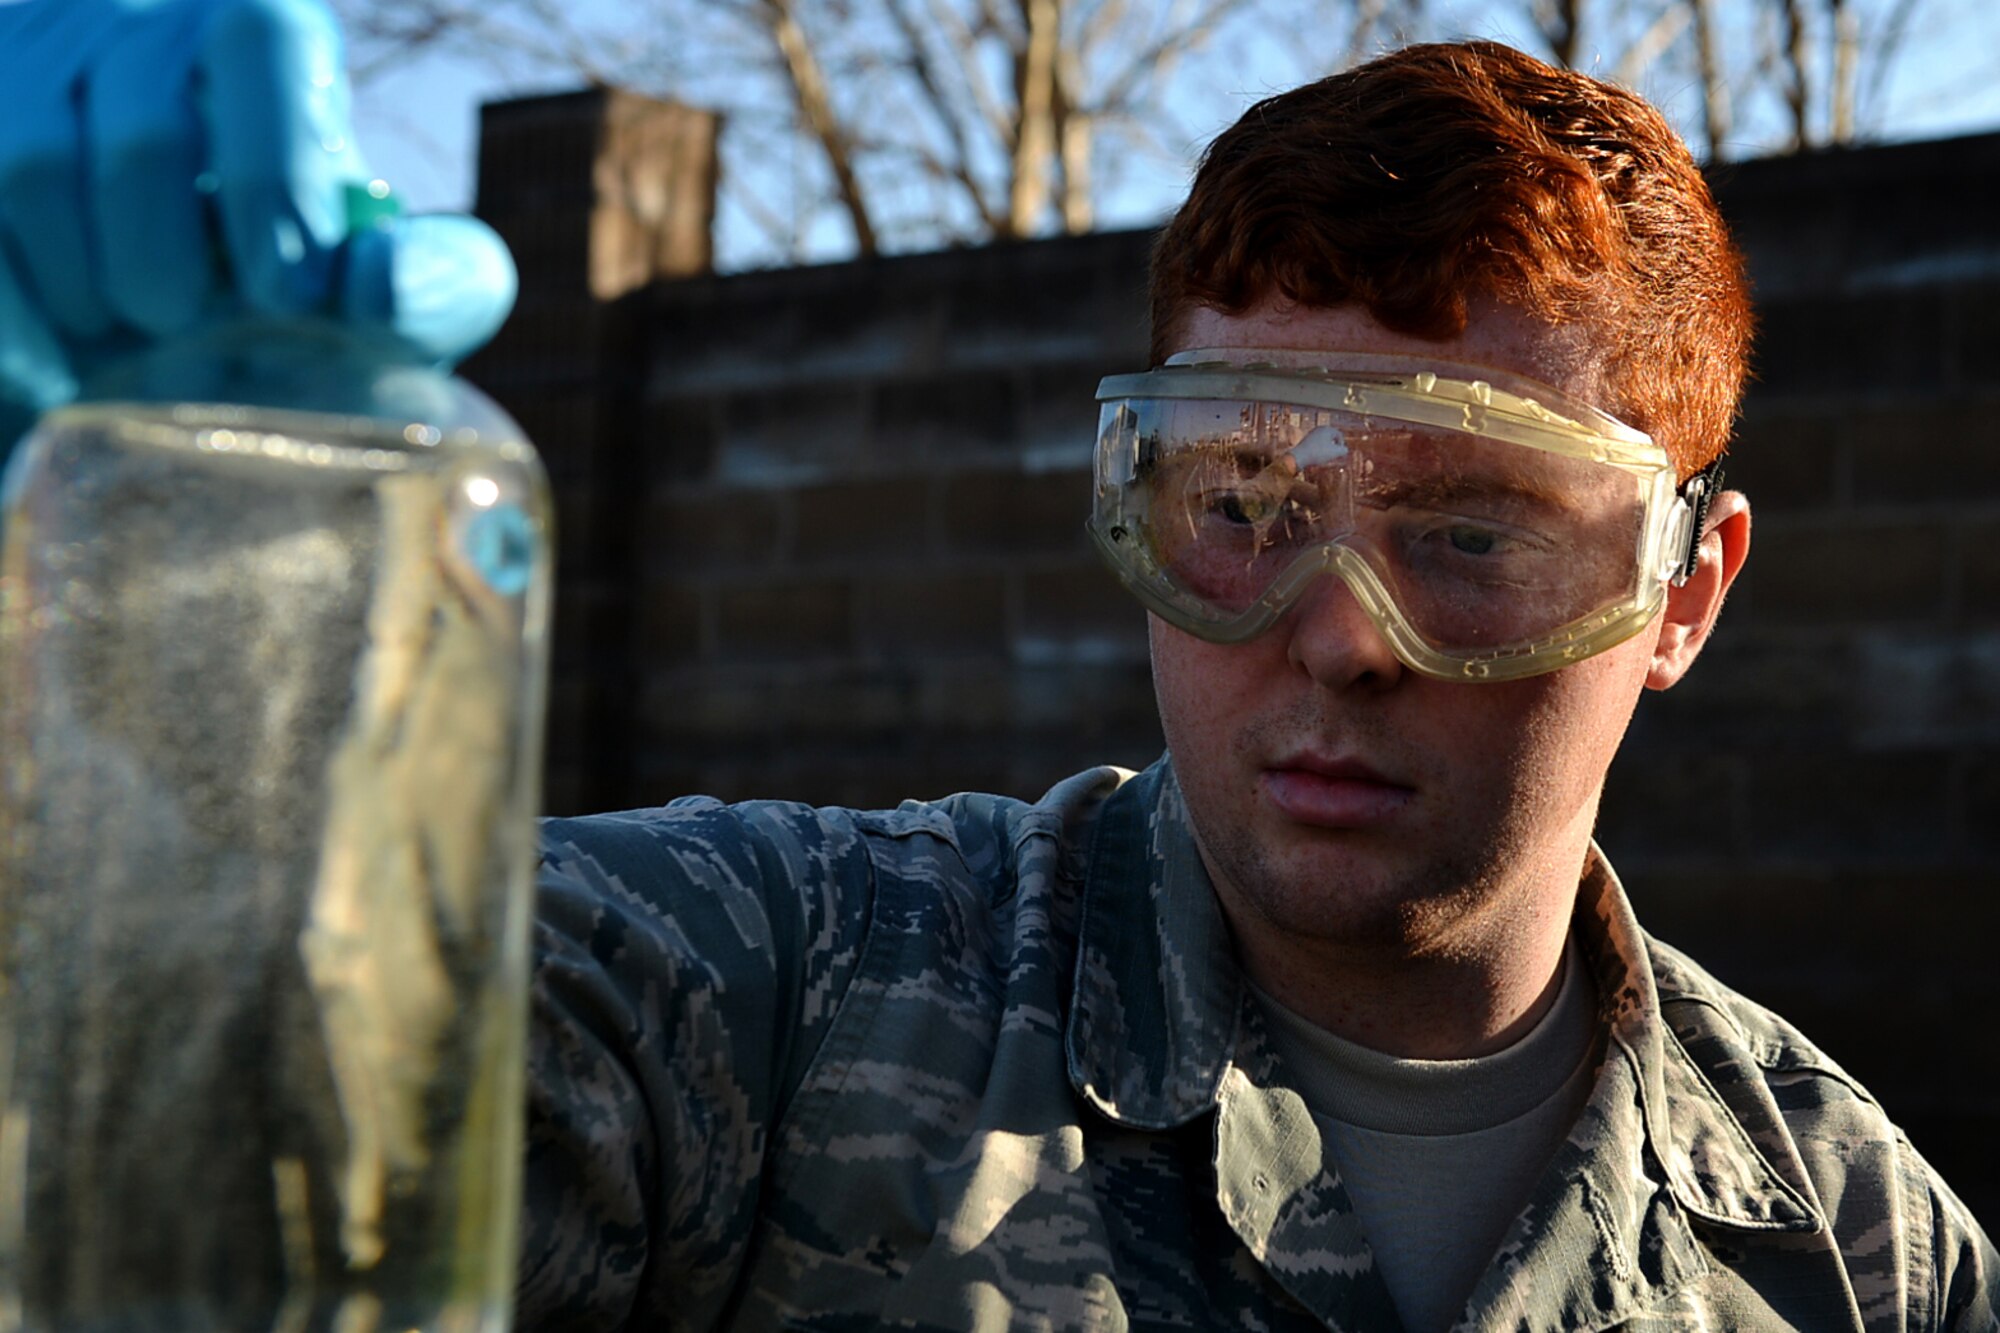 U.S. Air Force Airman 1st Class Zachary Hupp, 20th Logistics Readiness Squadron fuels laboratory technician, pulls a fuel sample to take back to the lab for testing at Shaw Air Force Base, S.C., Feb. 23, 2018.